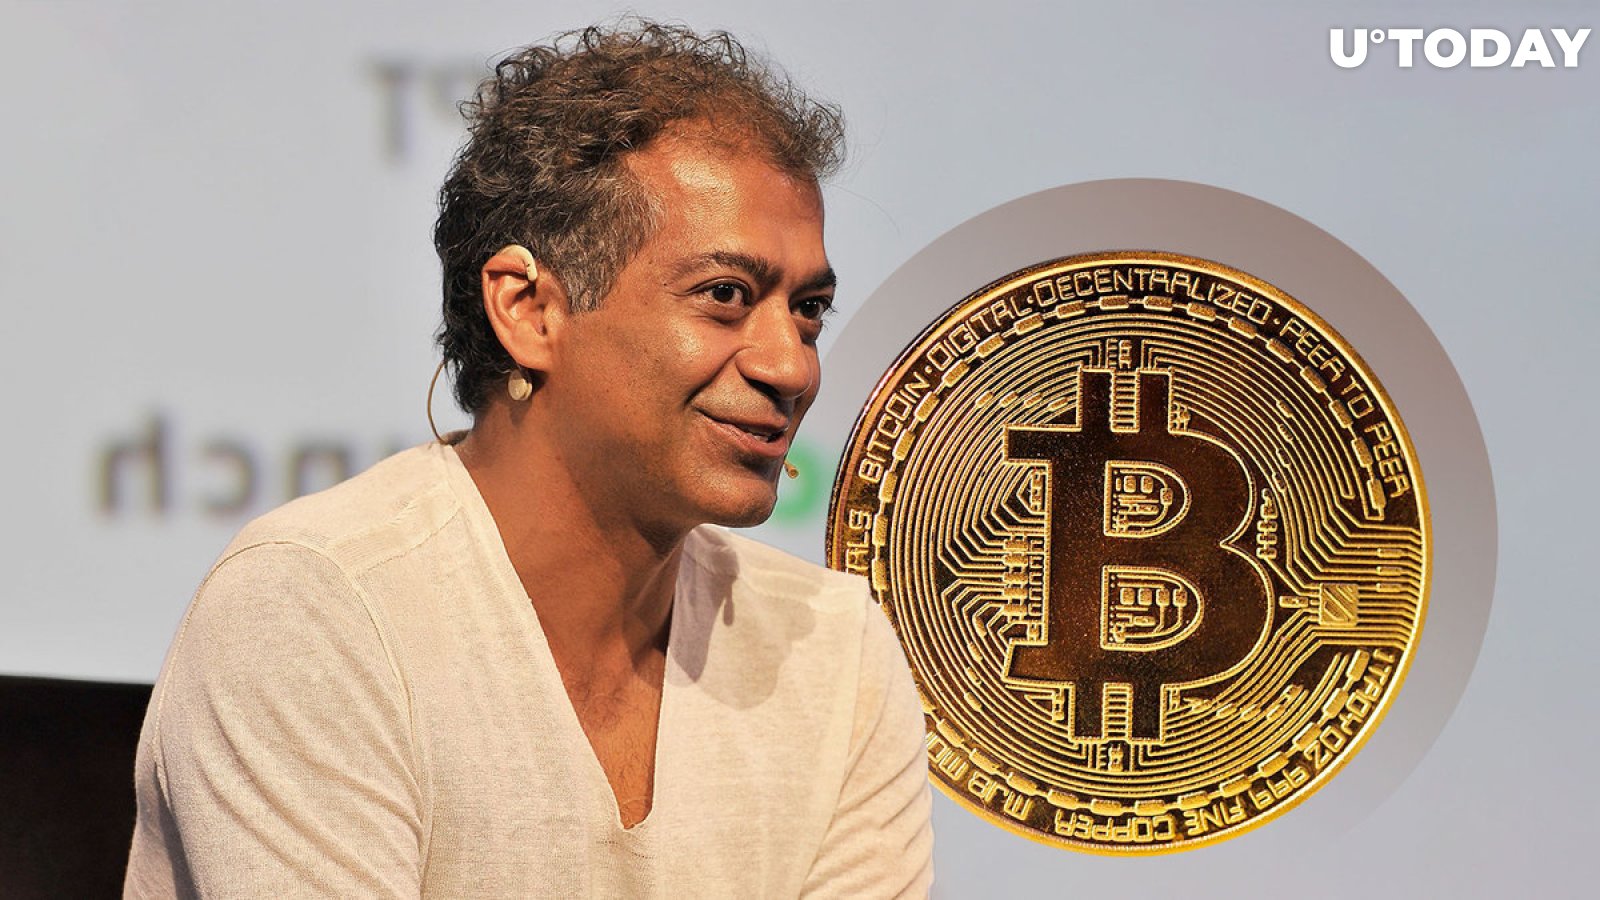 Early Twitter Investor Naval Ravikant Calls Bitcoin (BTC) True Store of Value